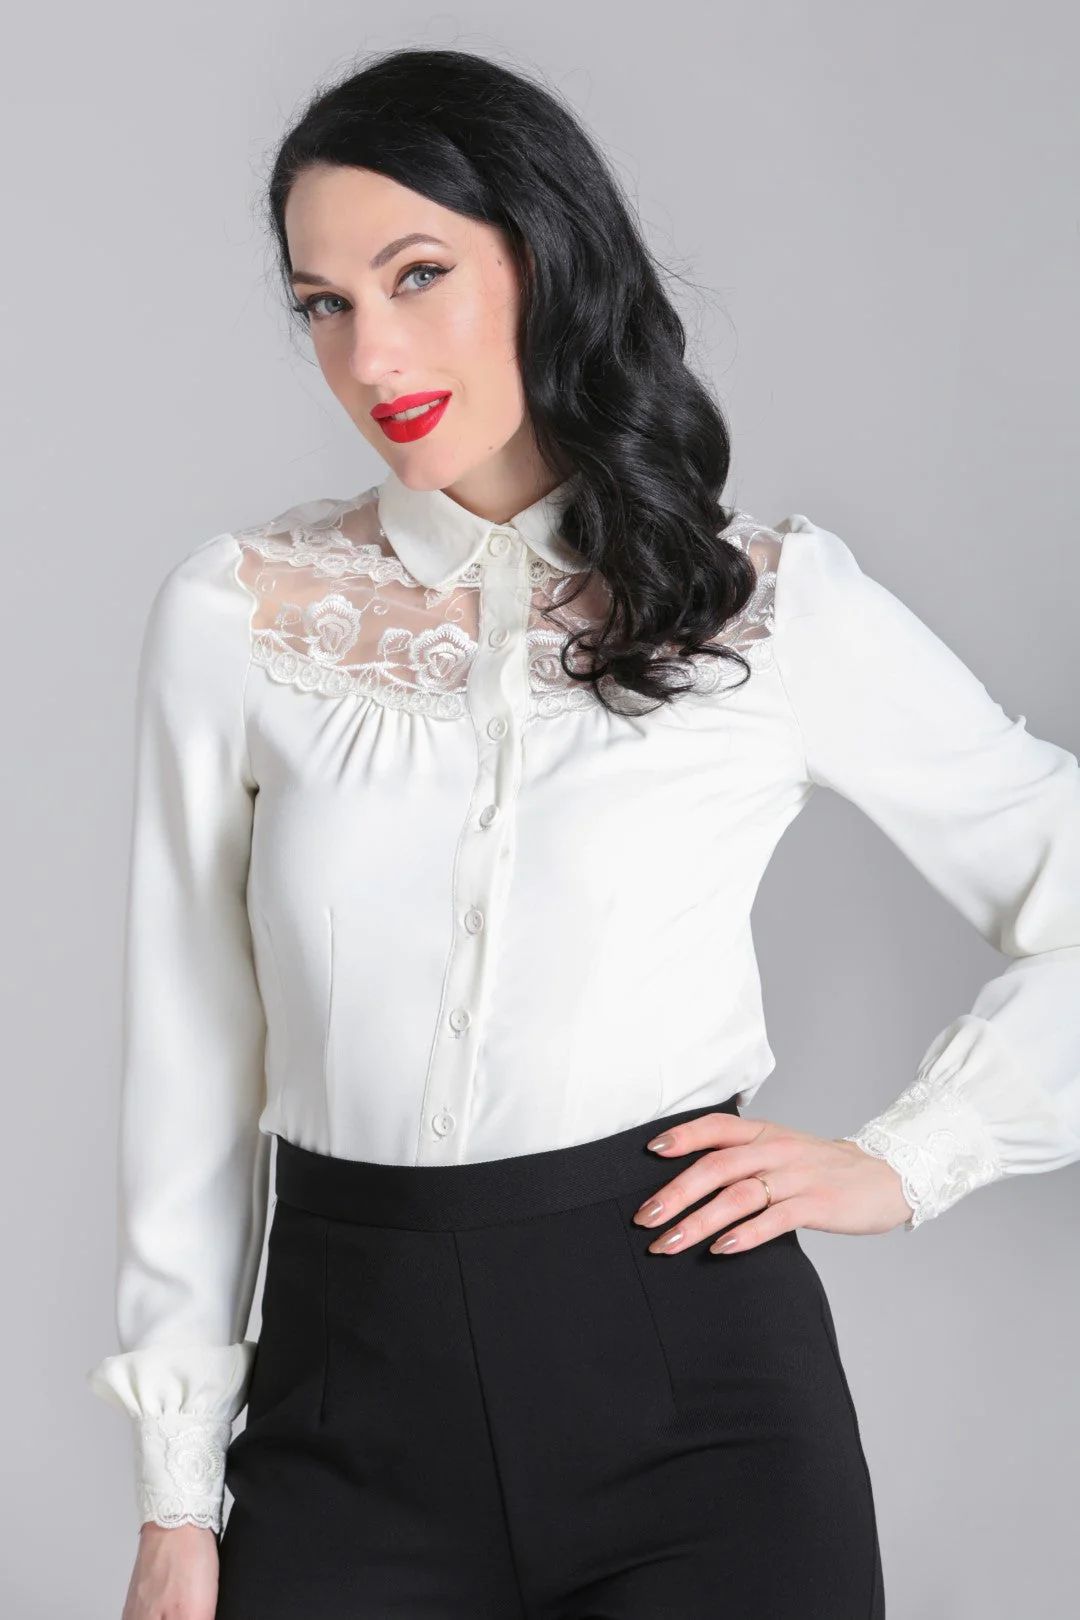 PS60273b-chemisier-blouse-pin-up-rockabilly-50-s-retro-hell-bunny-lucille